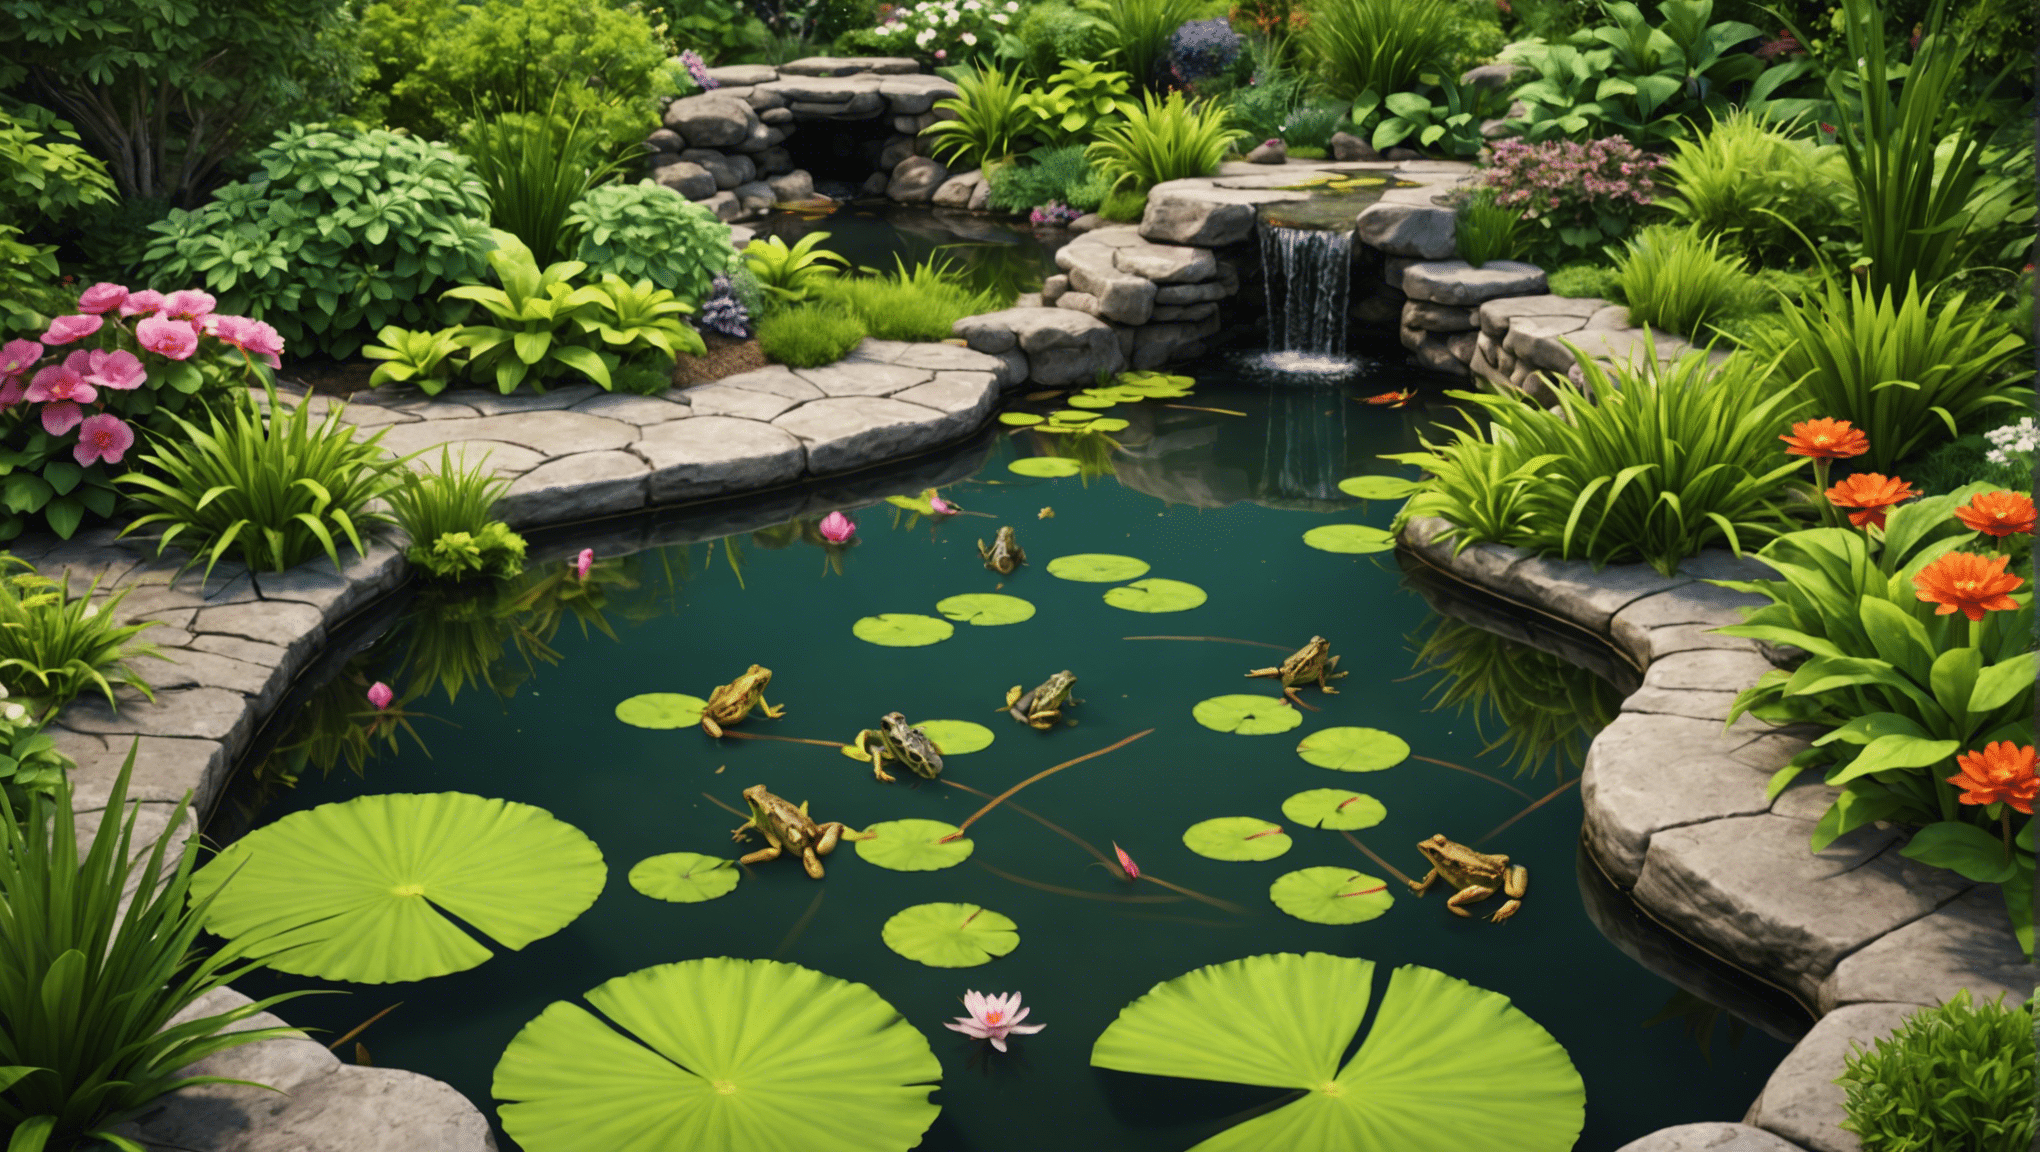 discover the benefits of adding small frog ponds to your garden and how they can enhance your outdoor space.